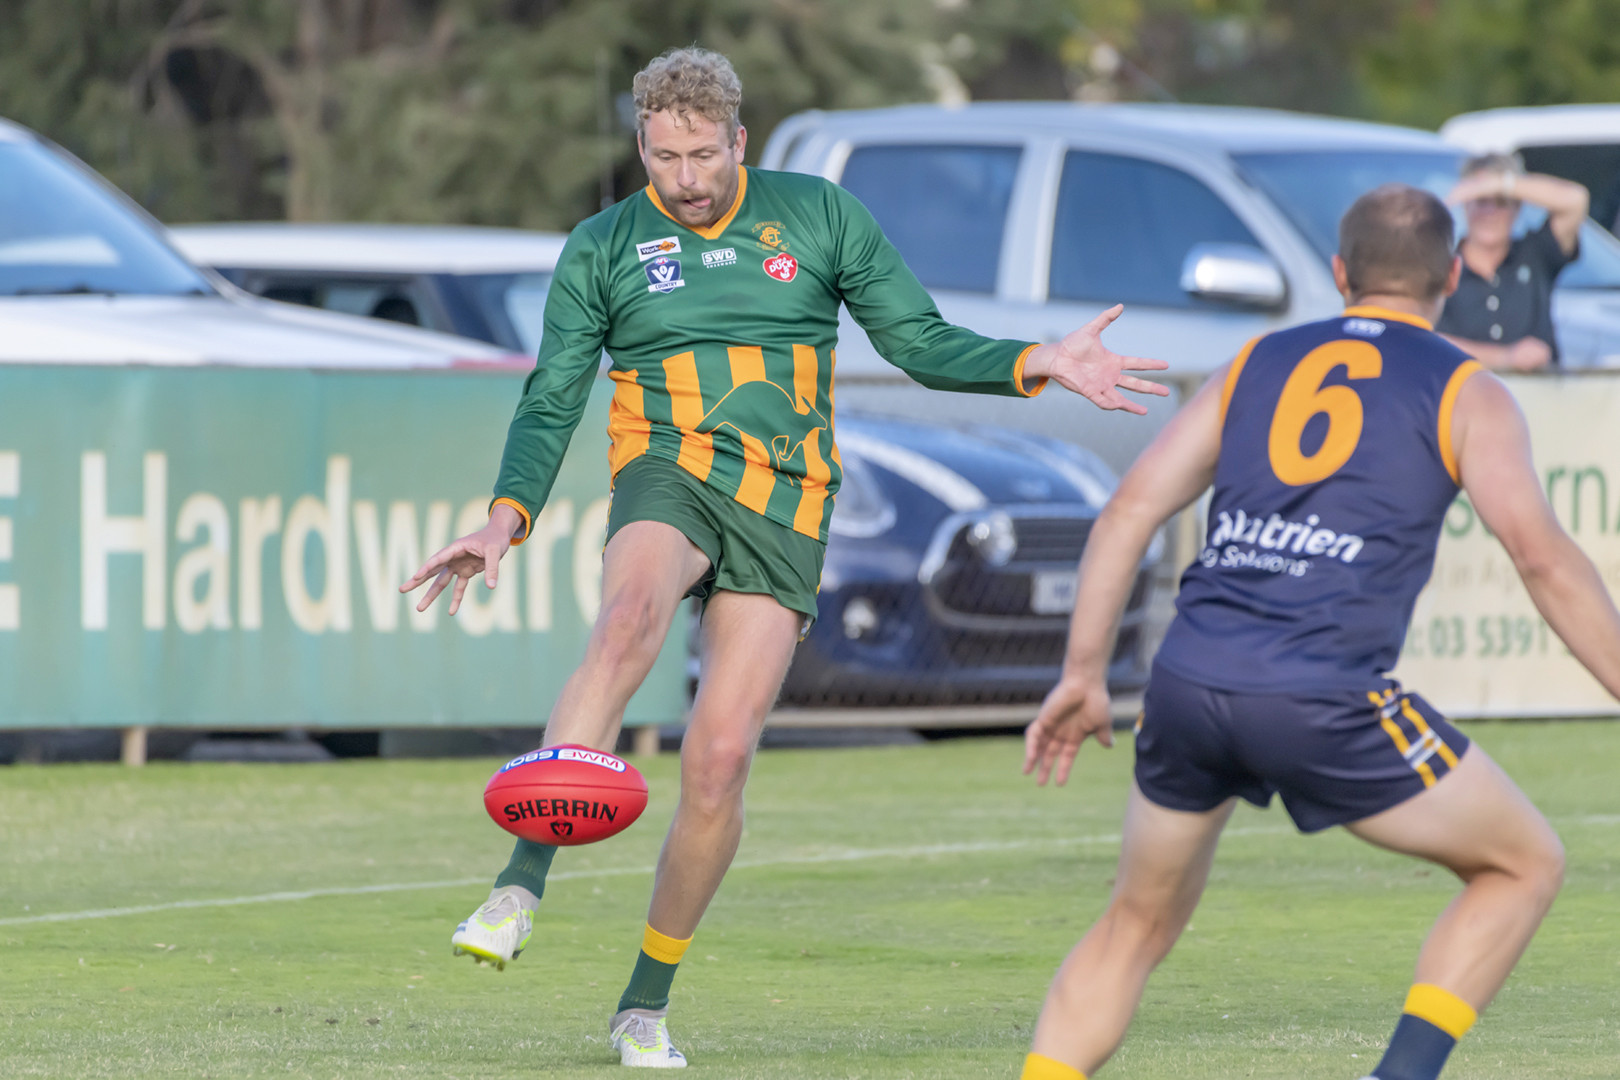 Dimboola recruit Jackson Calder hit the WFNL in style with five goals against Nhill.